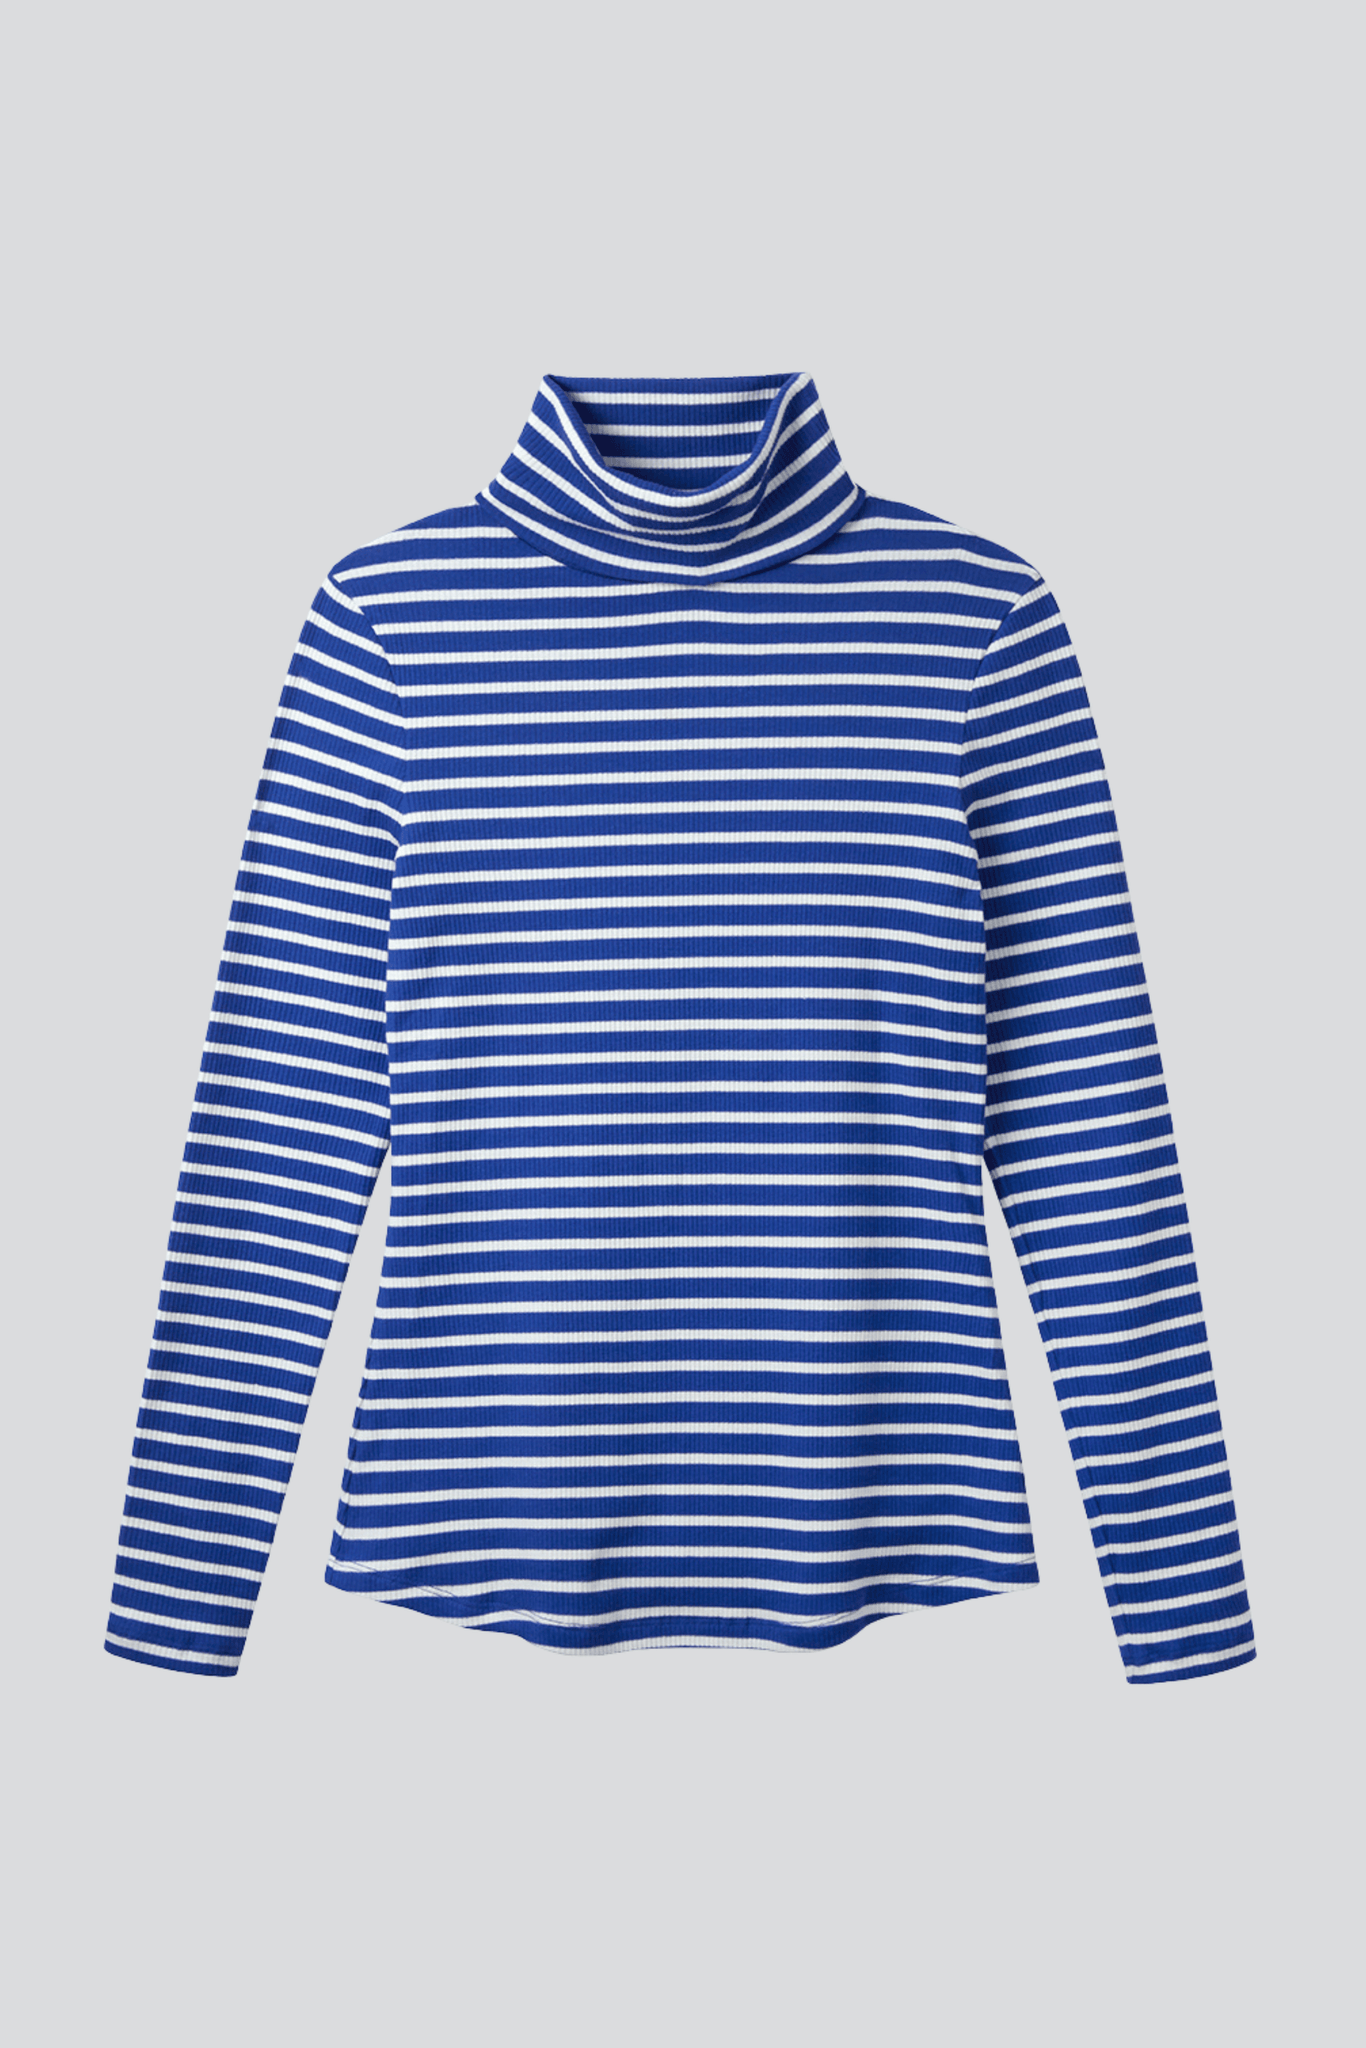 Quality Striped Cotton Roll Neck Top in Blue and White - Women's Long Sleeve Roll Neck Top - Comfortable Roll Neck Top by Lavender Hill Clothing